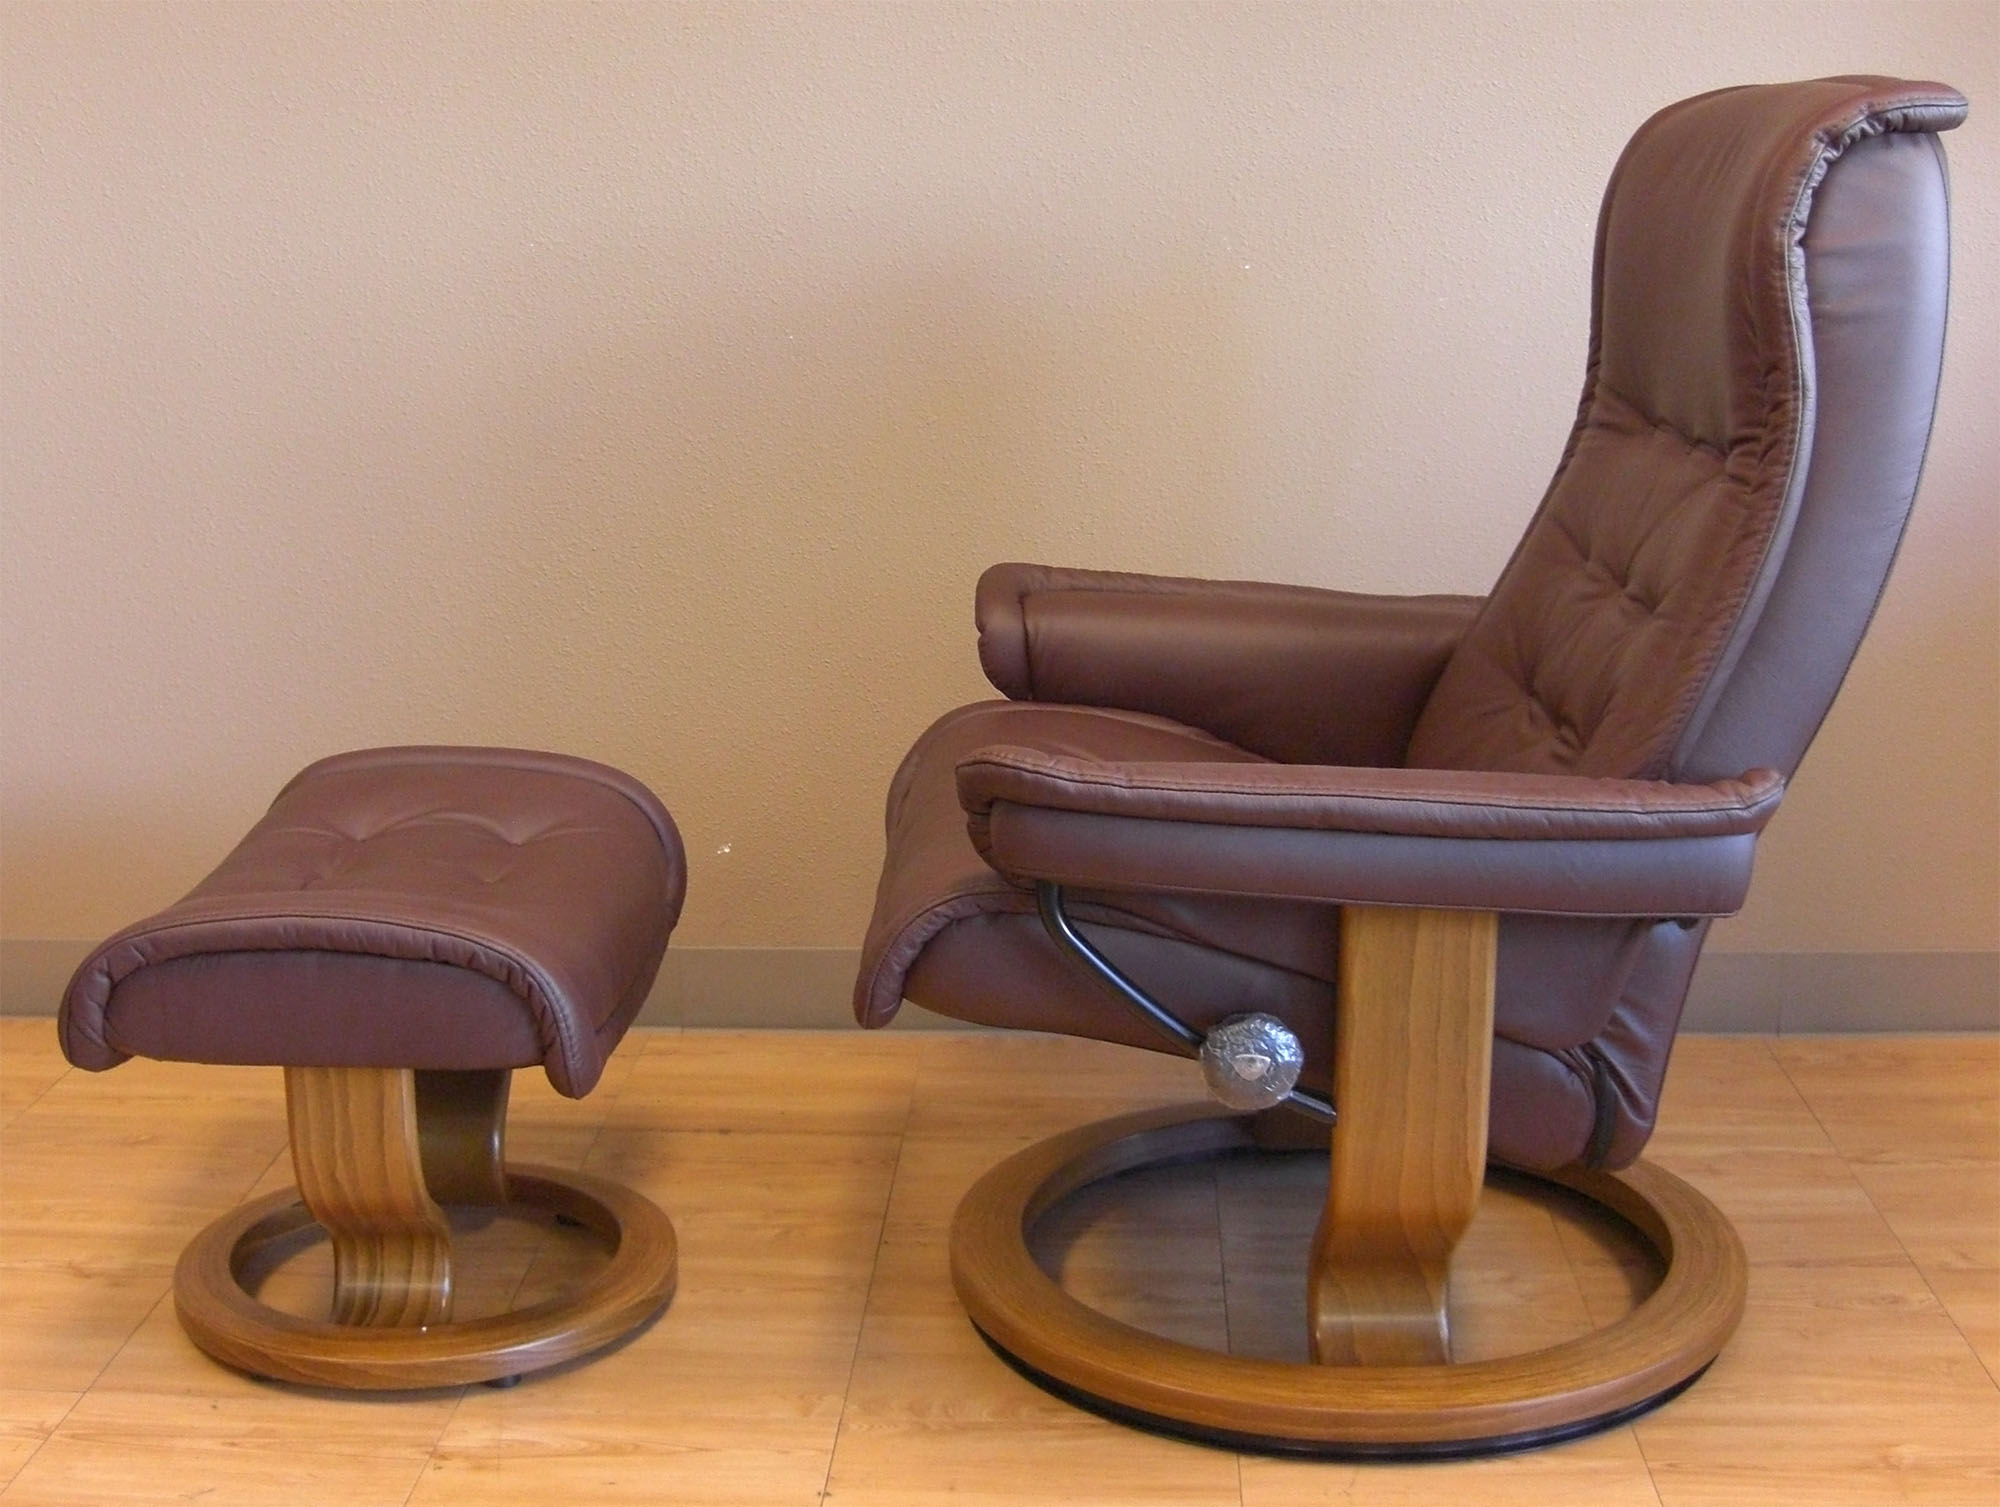 Stressless Paloma Coffee Leather Color Recliner Chair and Ottoman from Ekornes